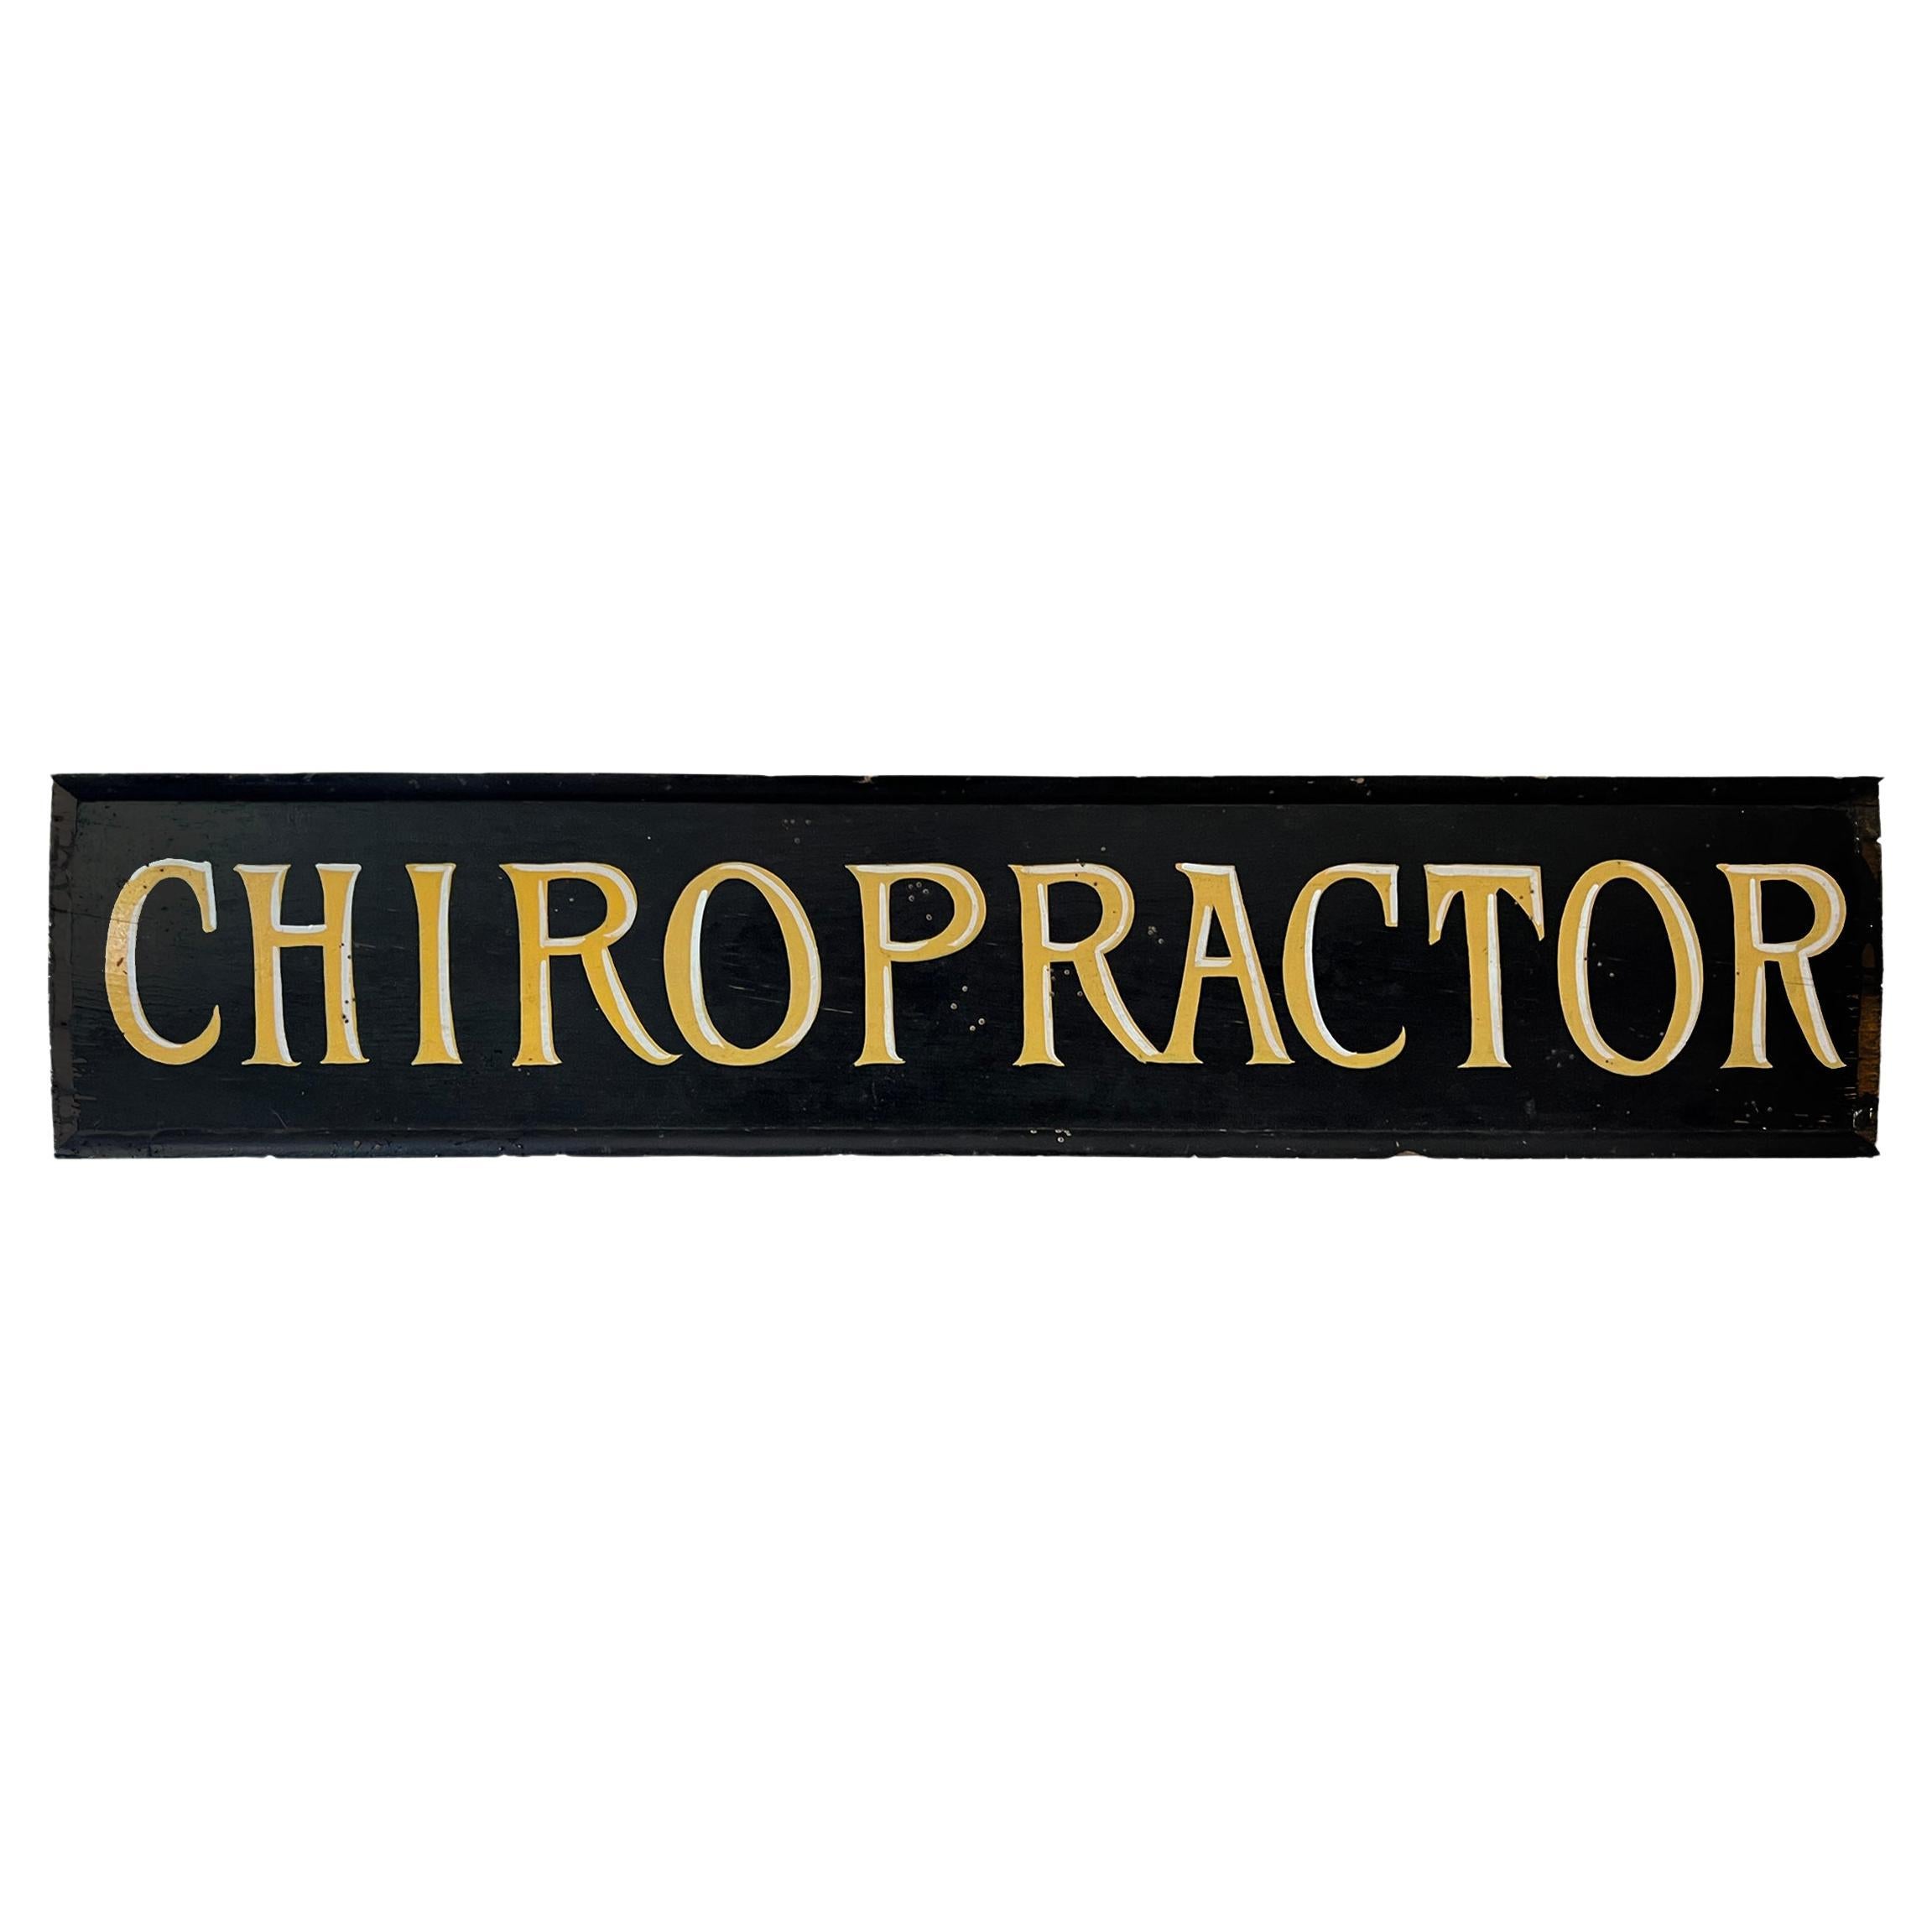 Early 20th Century American "Chiropractor" Sign